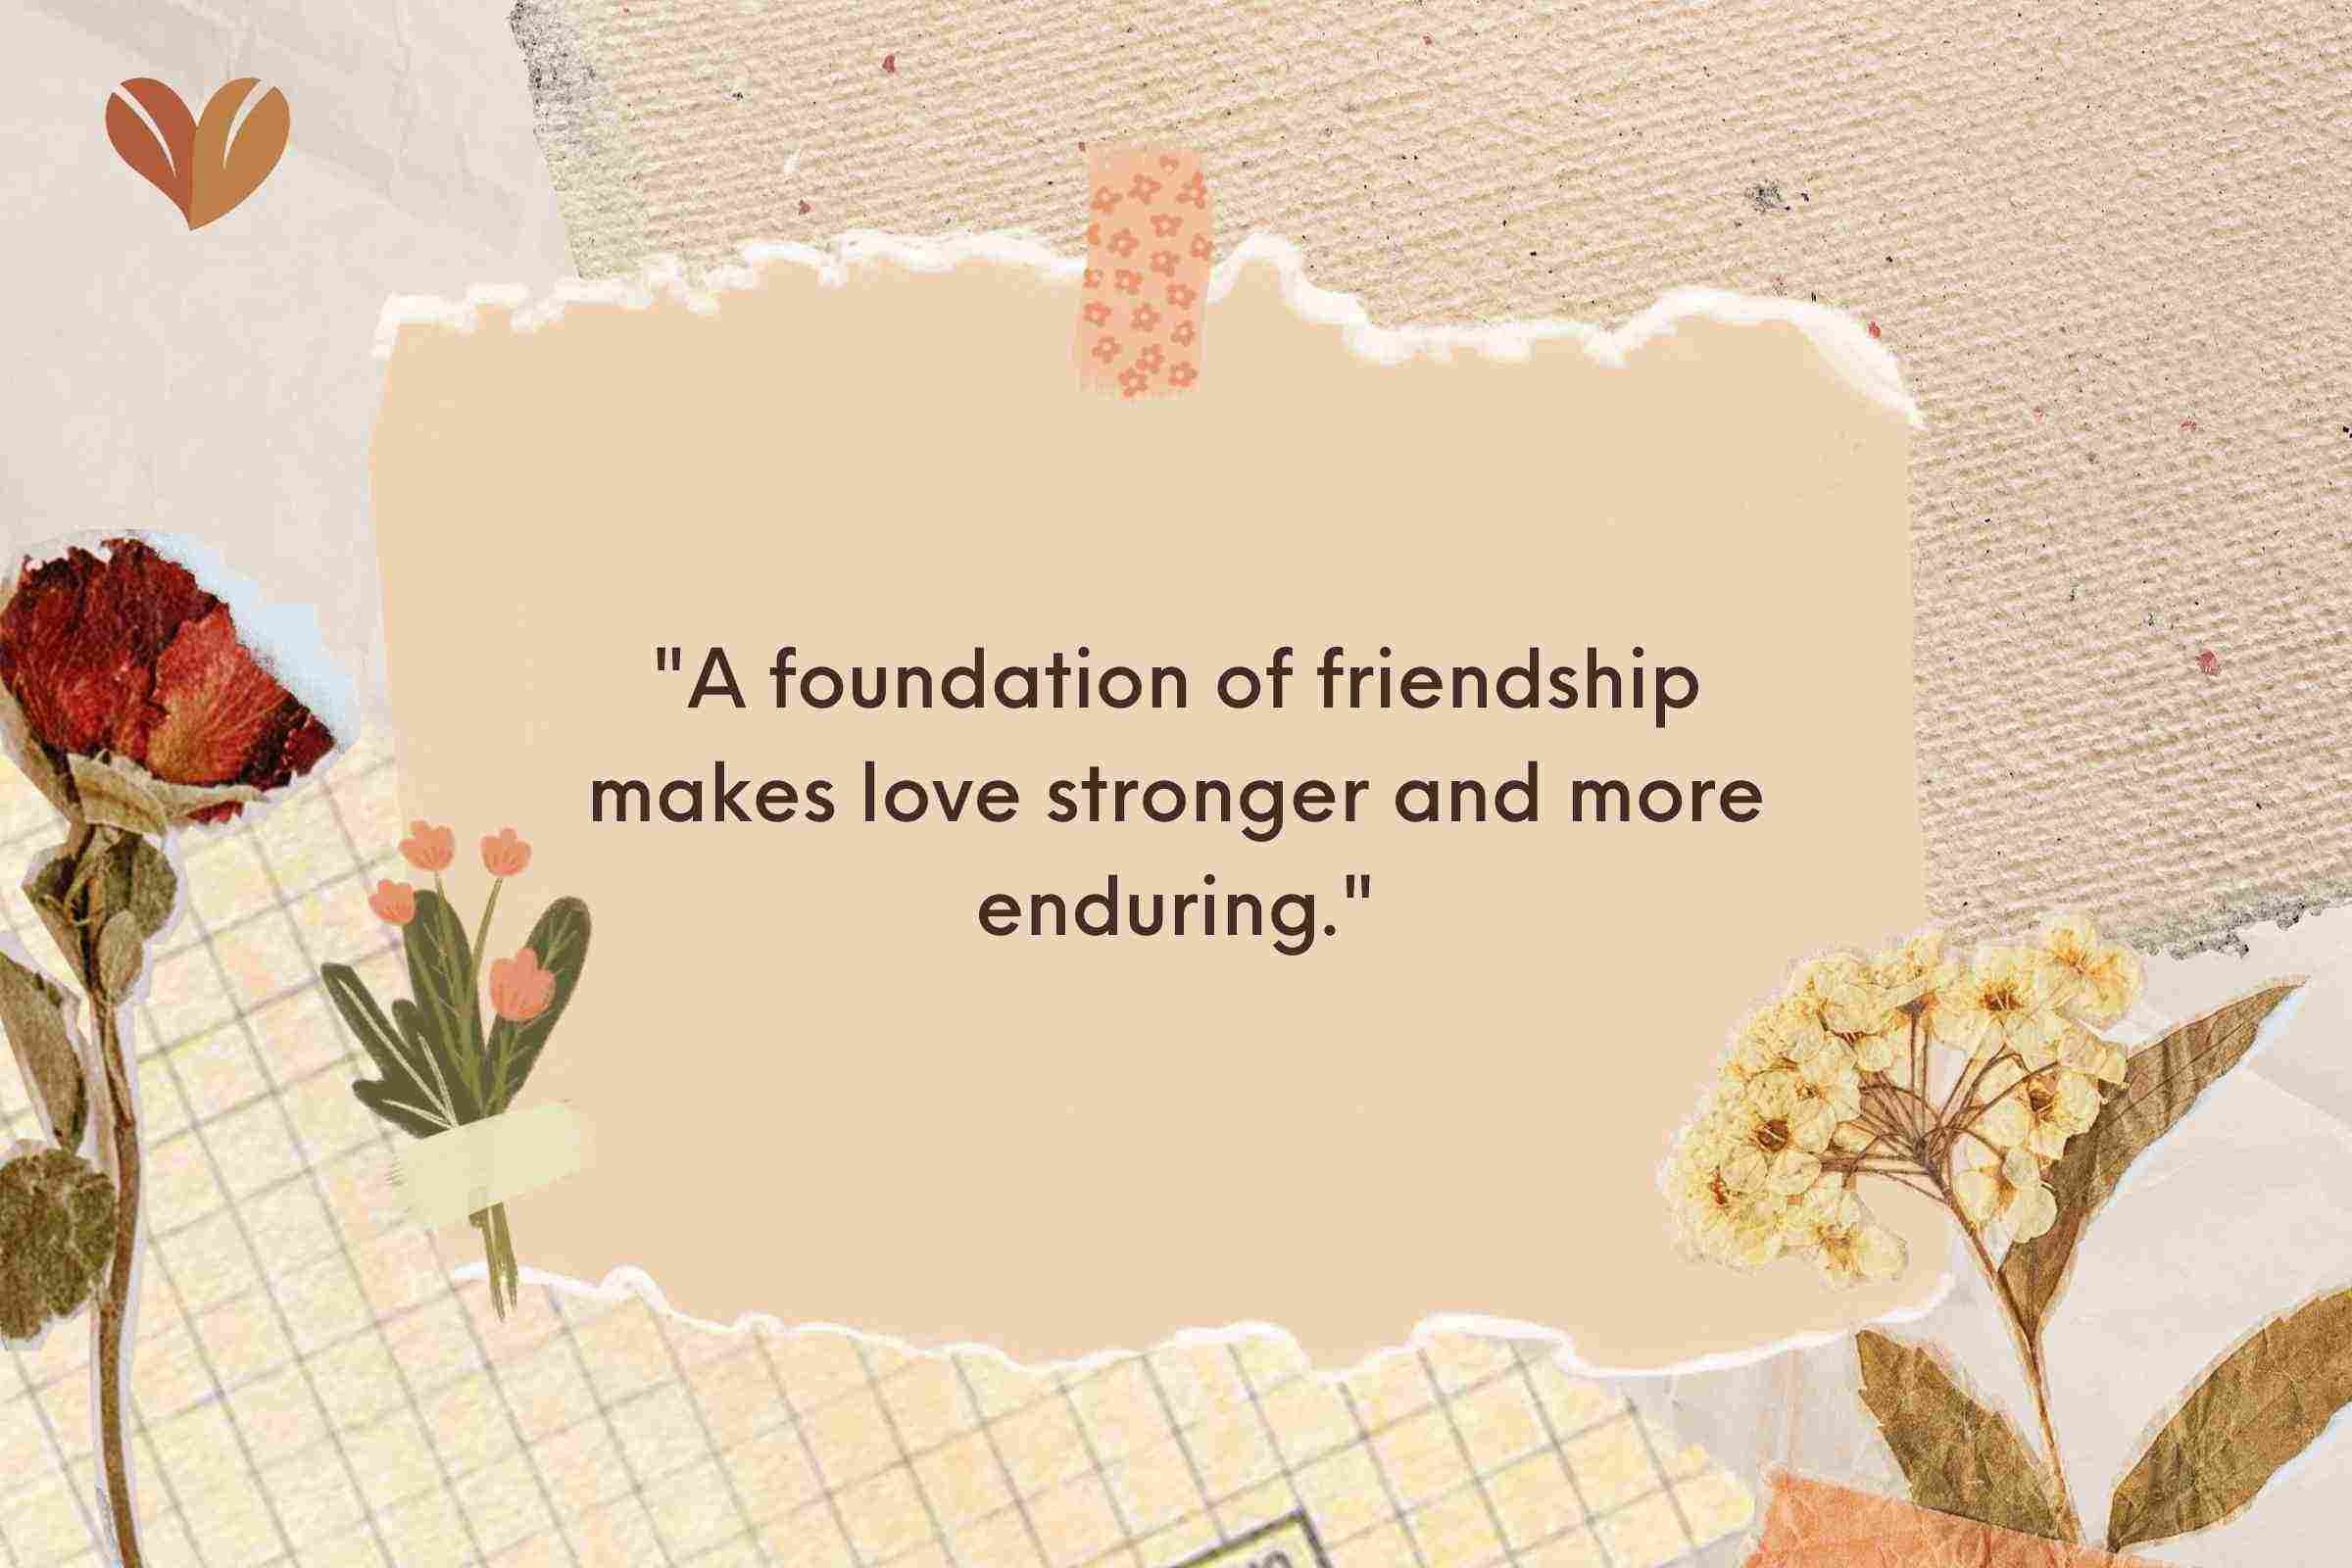 A foundation of friendship makes love stronger and more enduring.